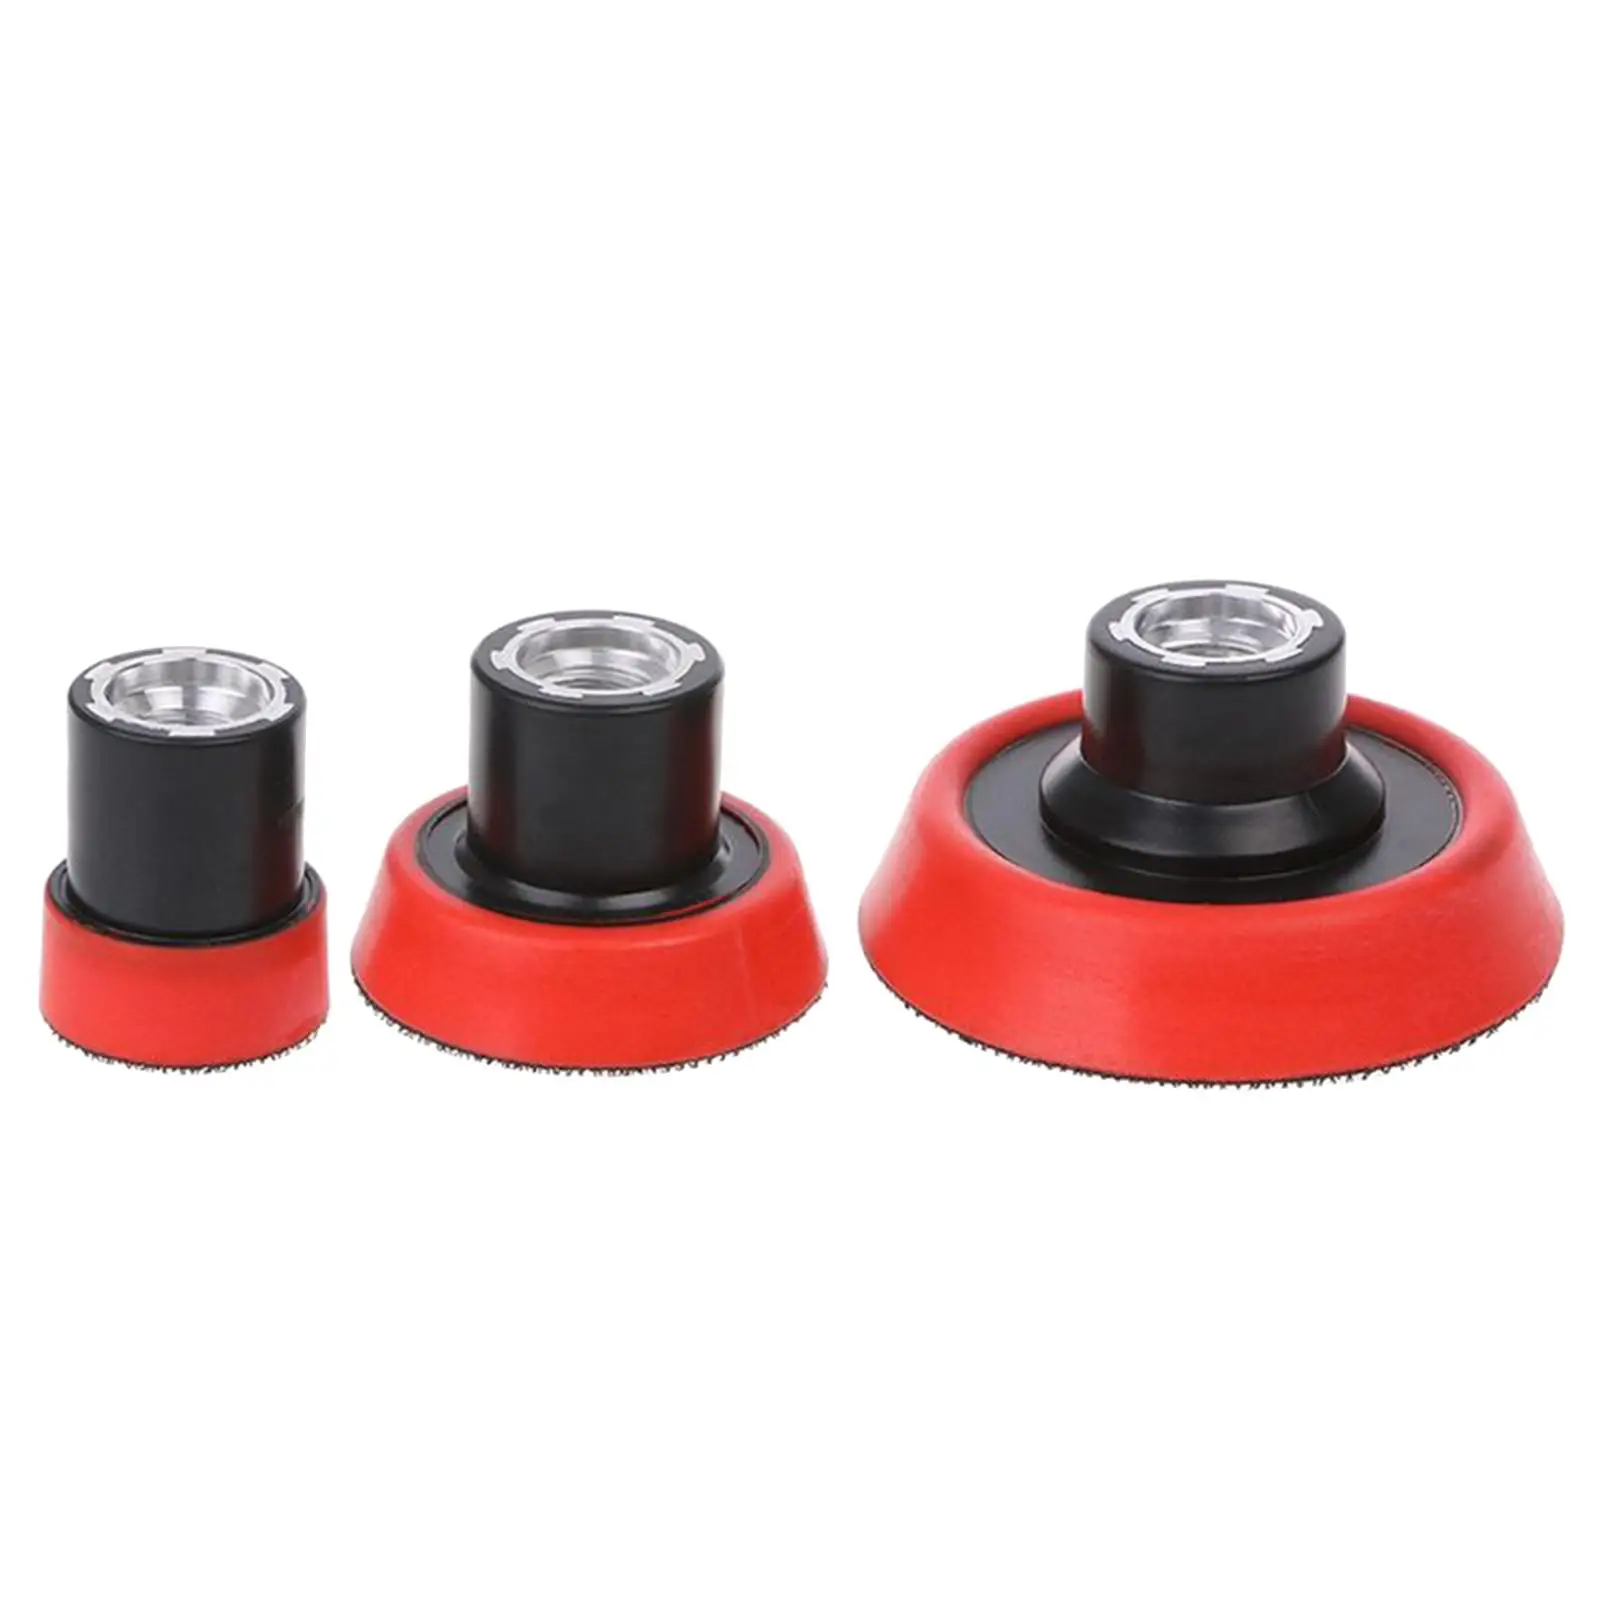 3 Pieces M10 Parts Buffering Durable Backer Tools Set Backing Plate Polisher